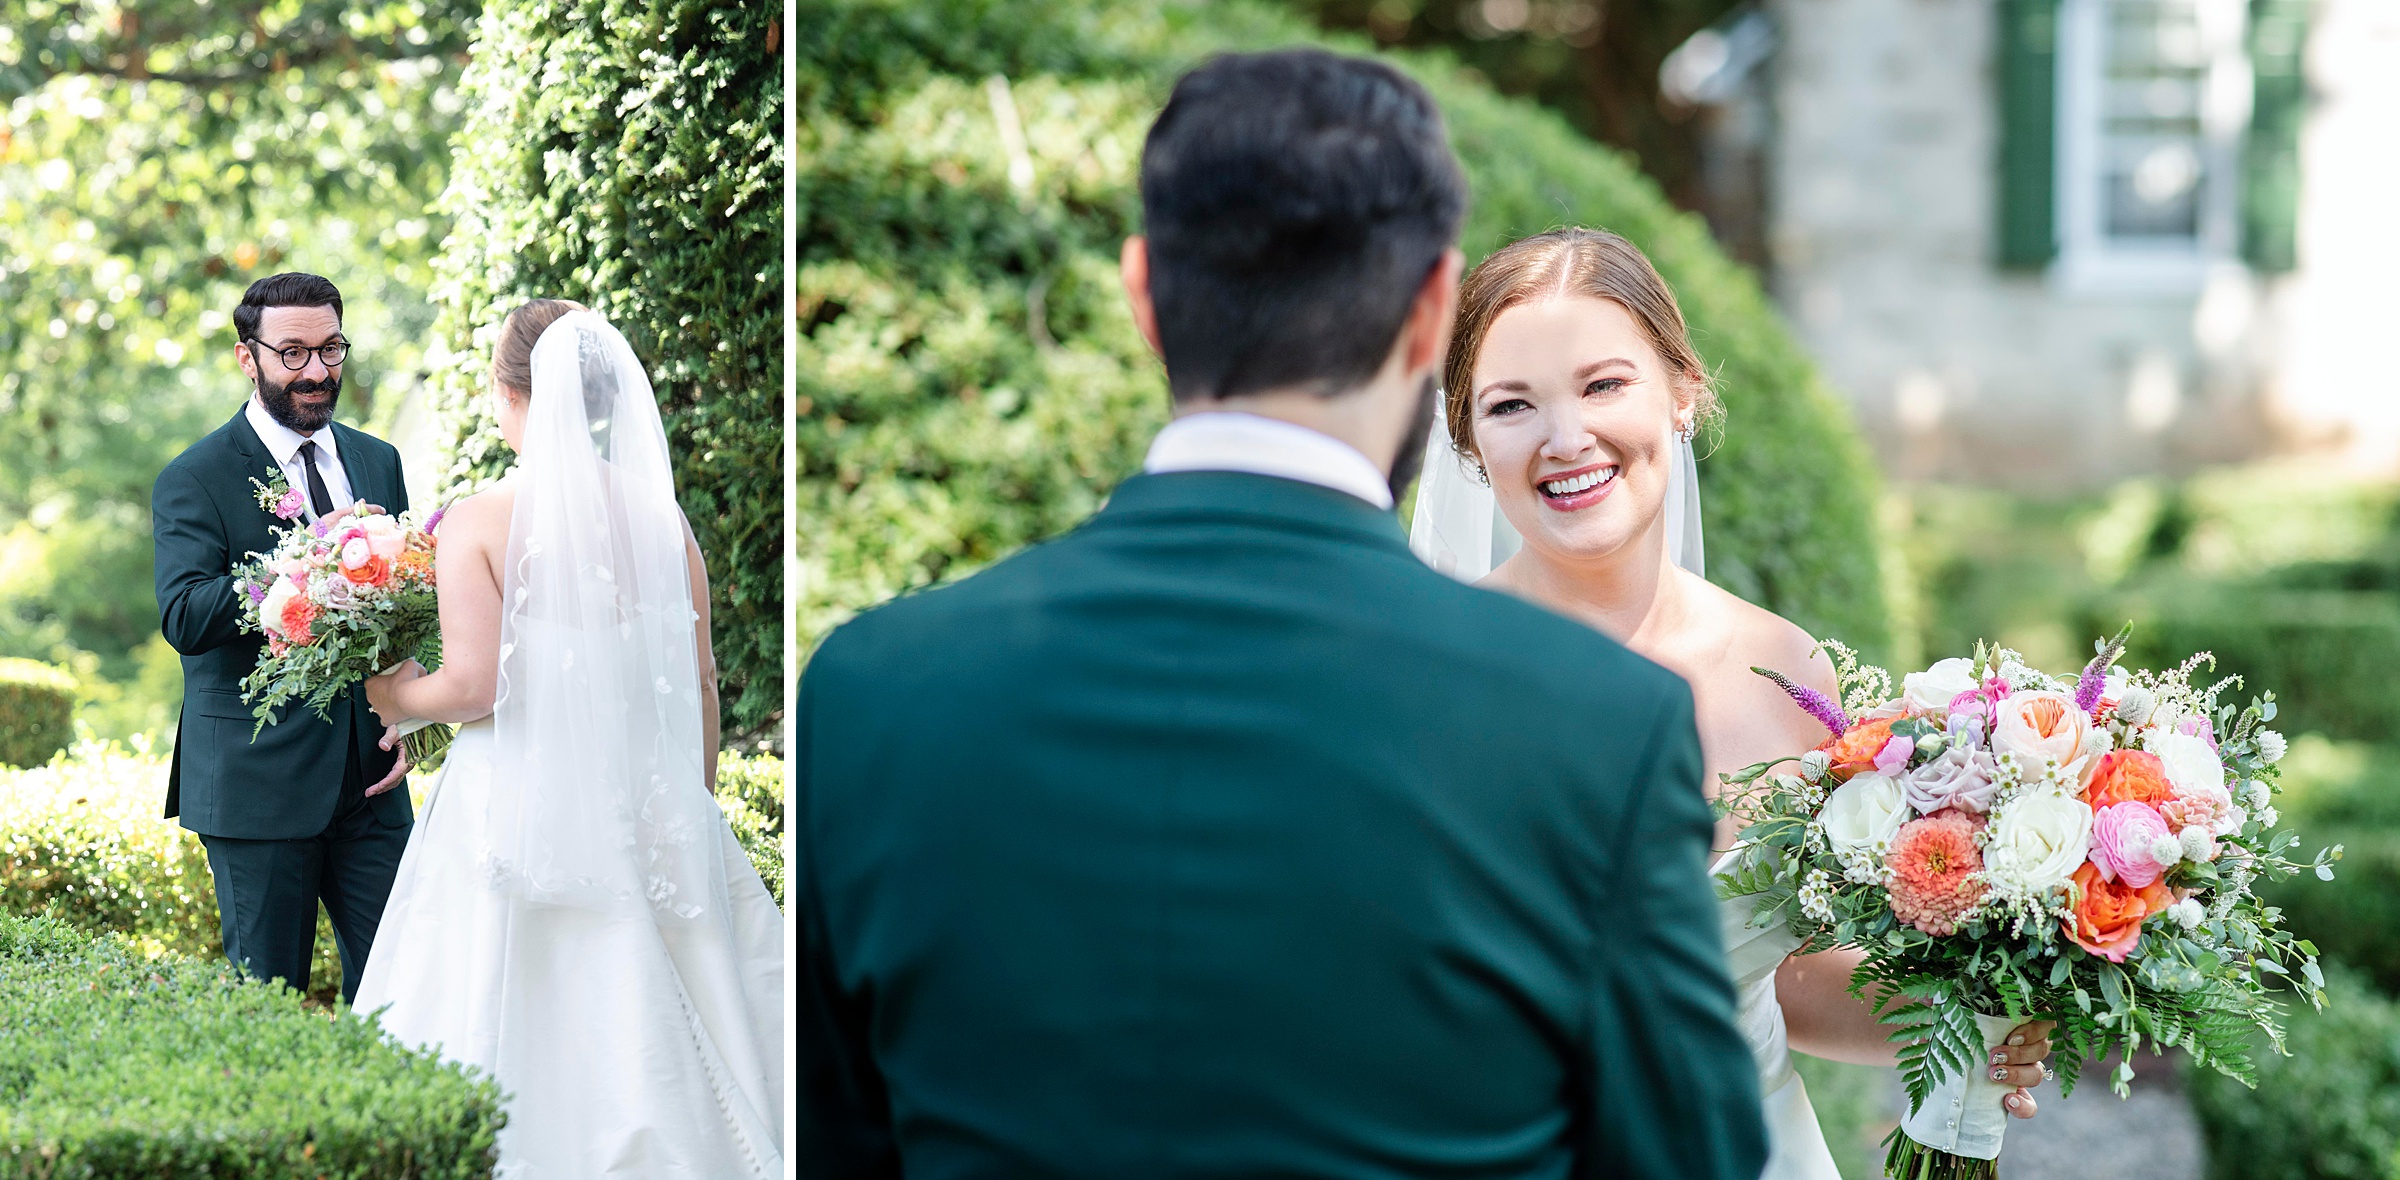 Dreamy & Vibrant Wedding at Appleford Estate | first look